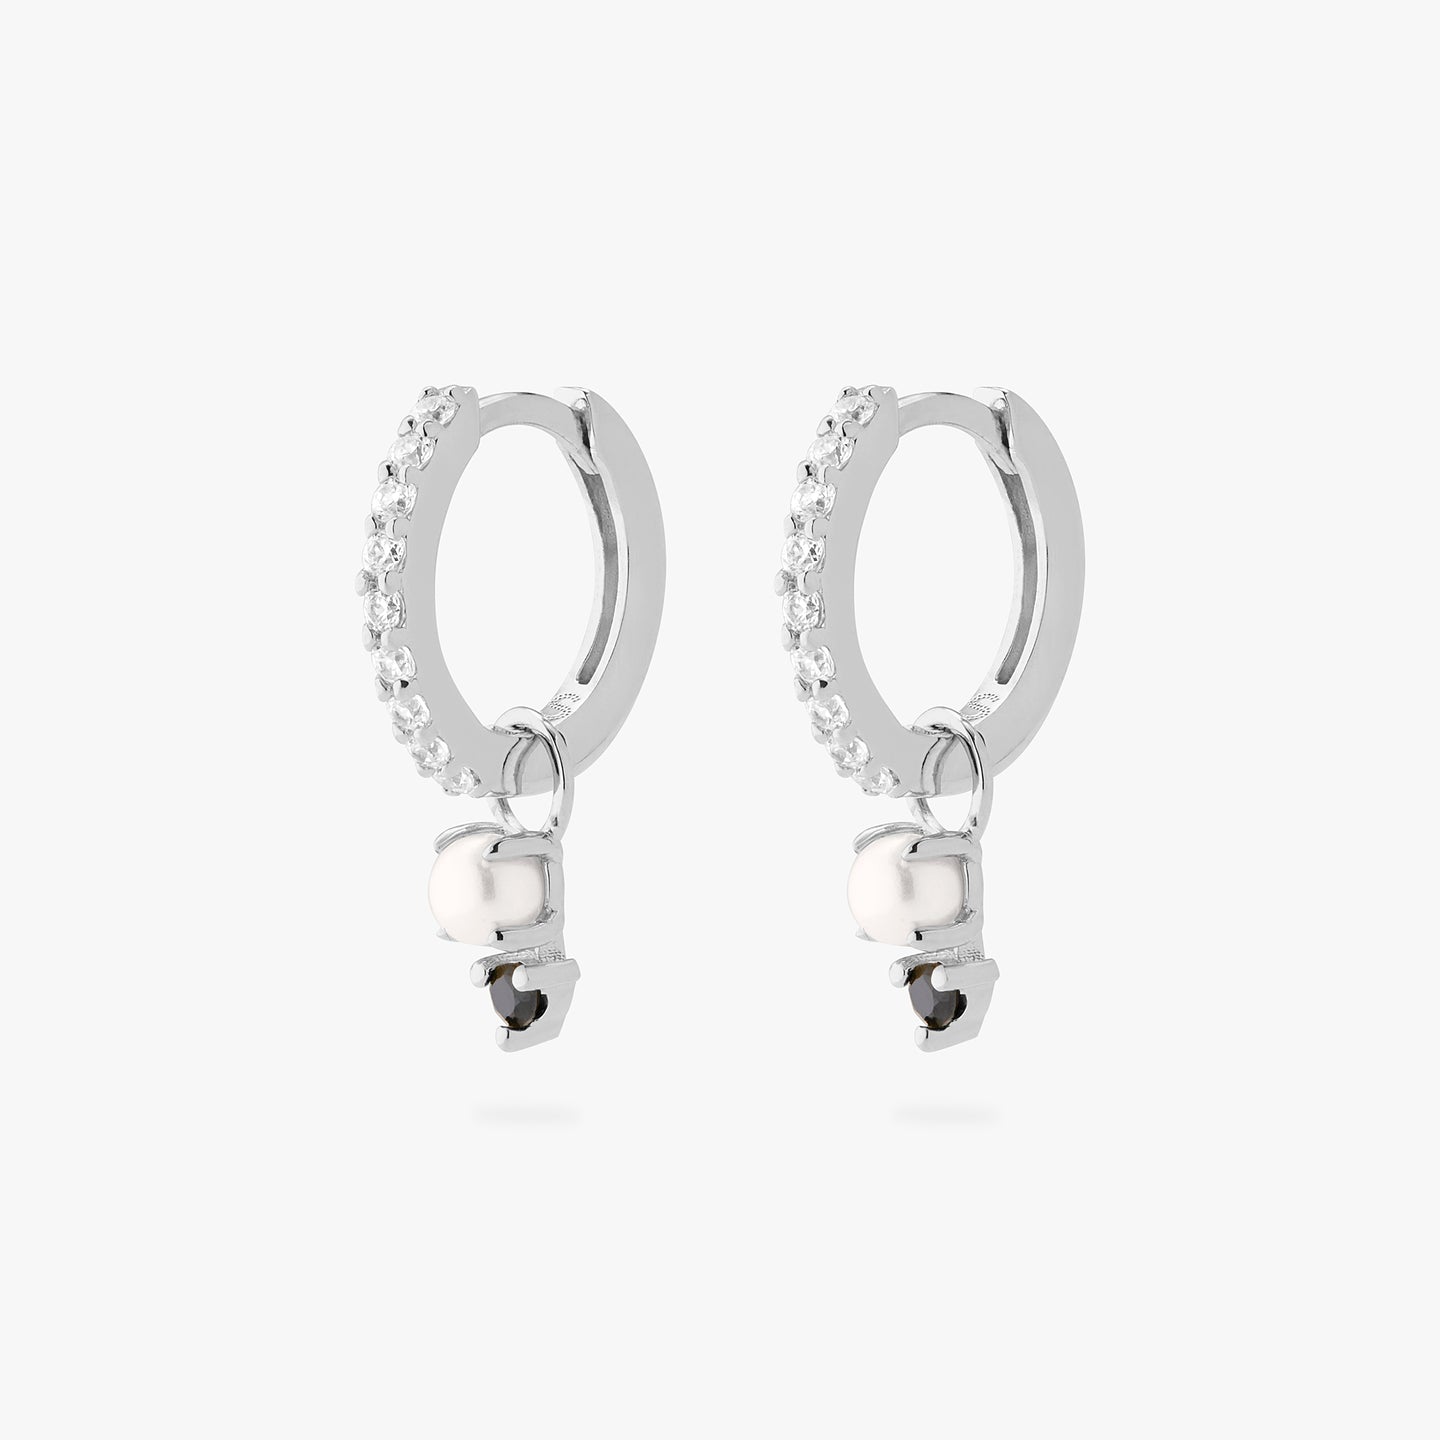 A pair of silver/clear mini pave huggies with a black stacked cz pearl charm. [pair] color:null|silver/black